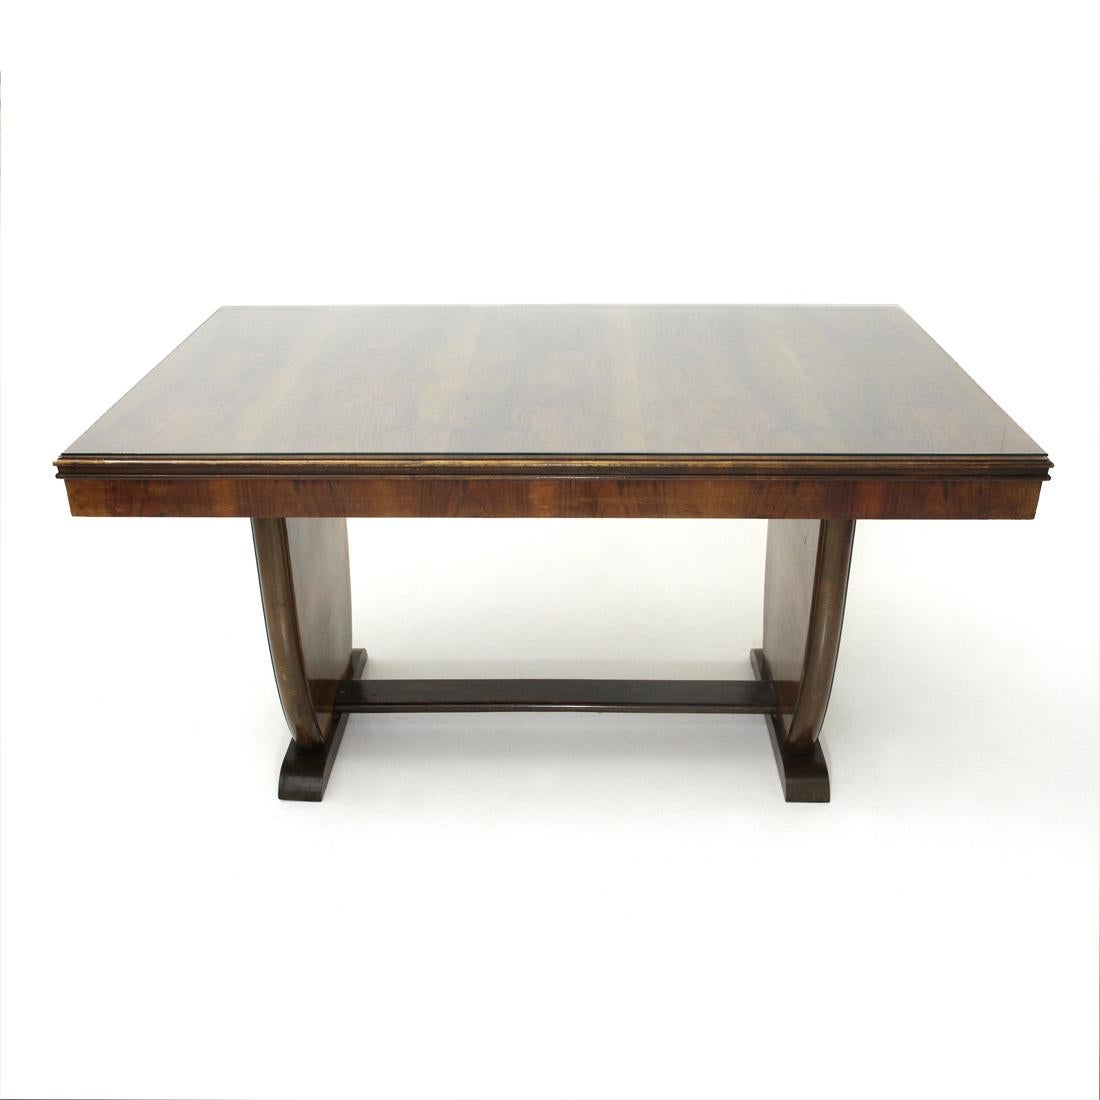 Mid-20th Century Italian Wooden Dining Table, 1940s For Sale